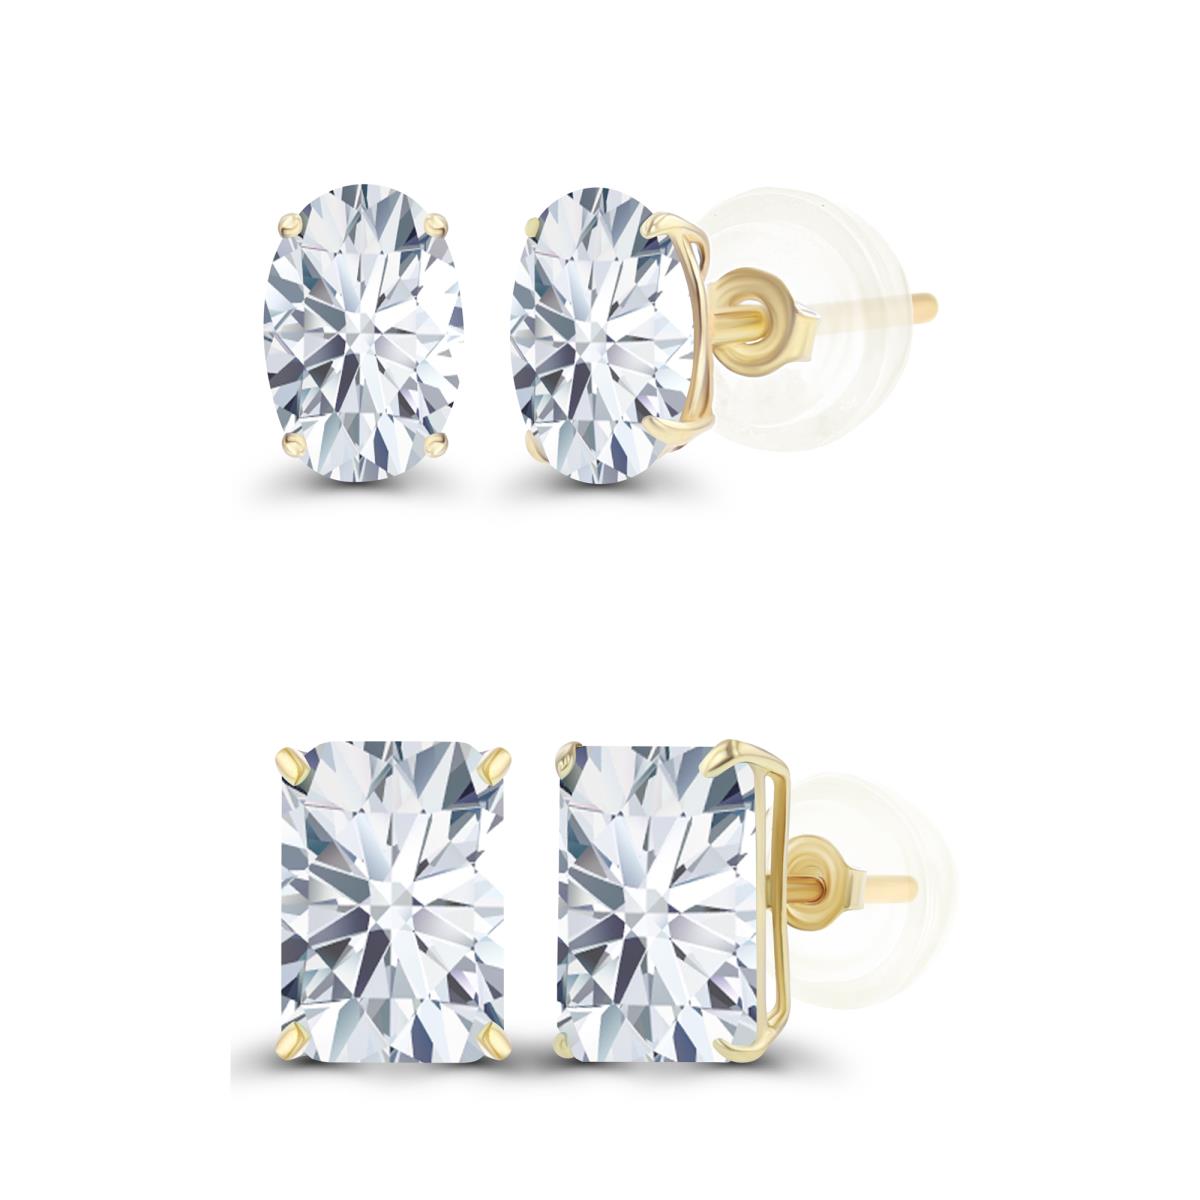 10K Yellow Gold 7x5mm Oval & Octagon Created White Sapphire Earring Set